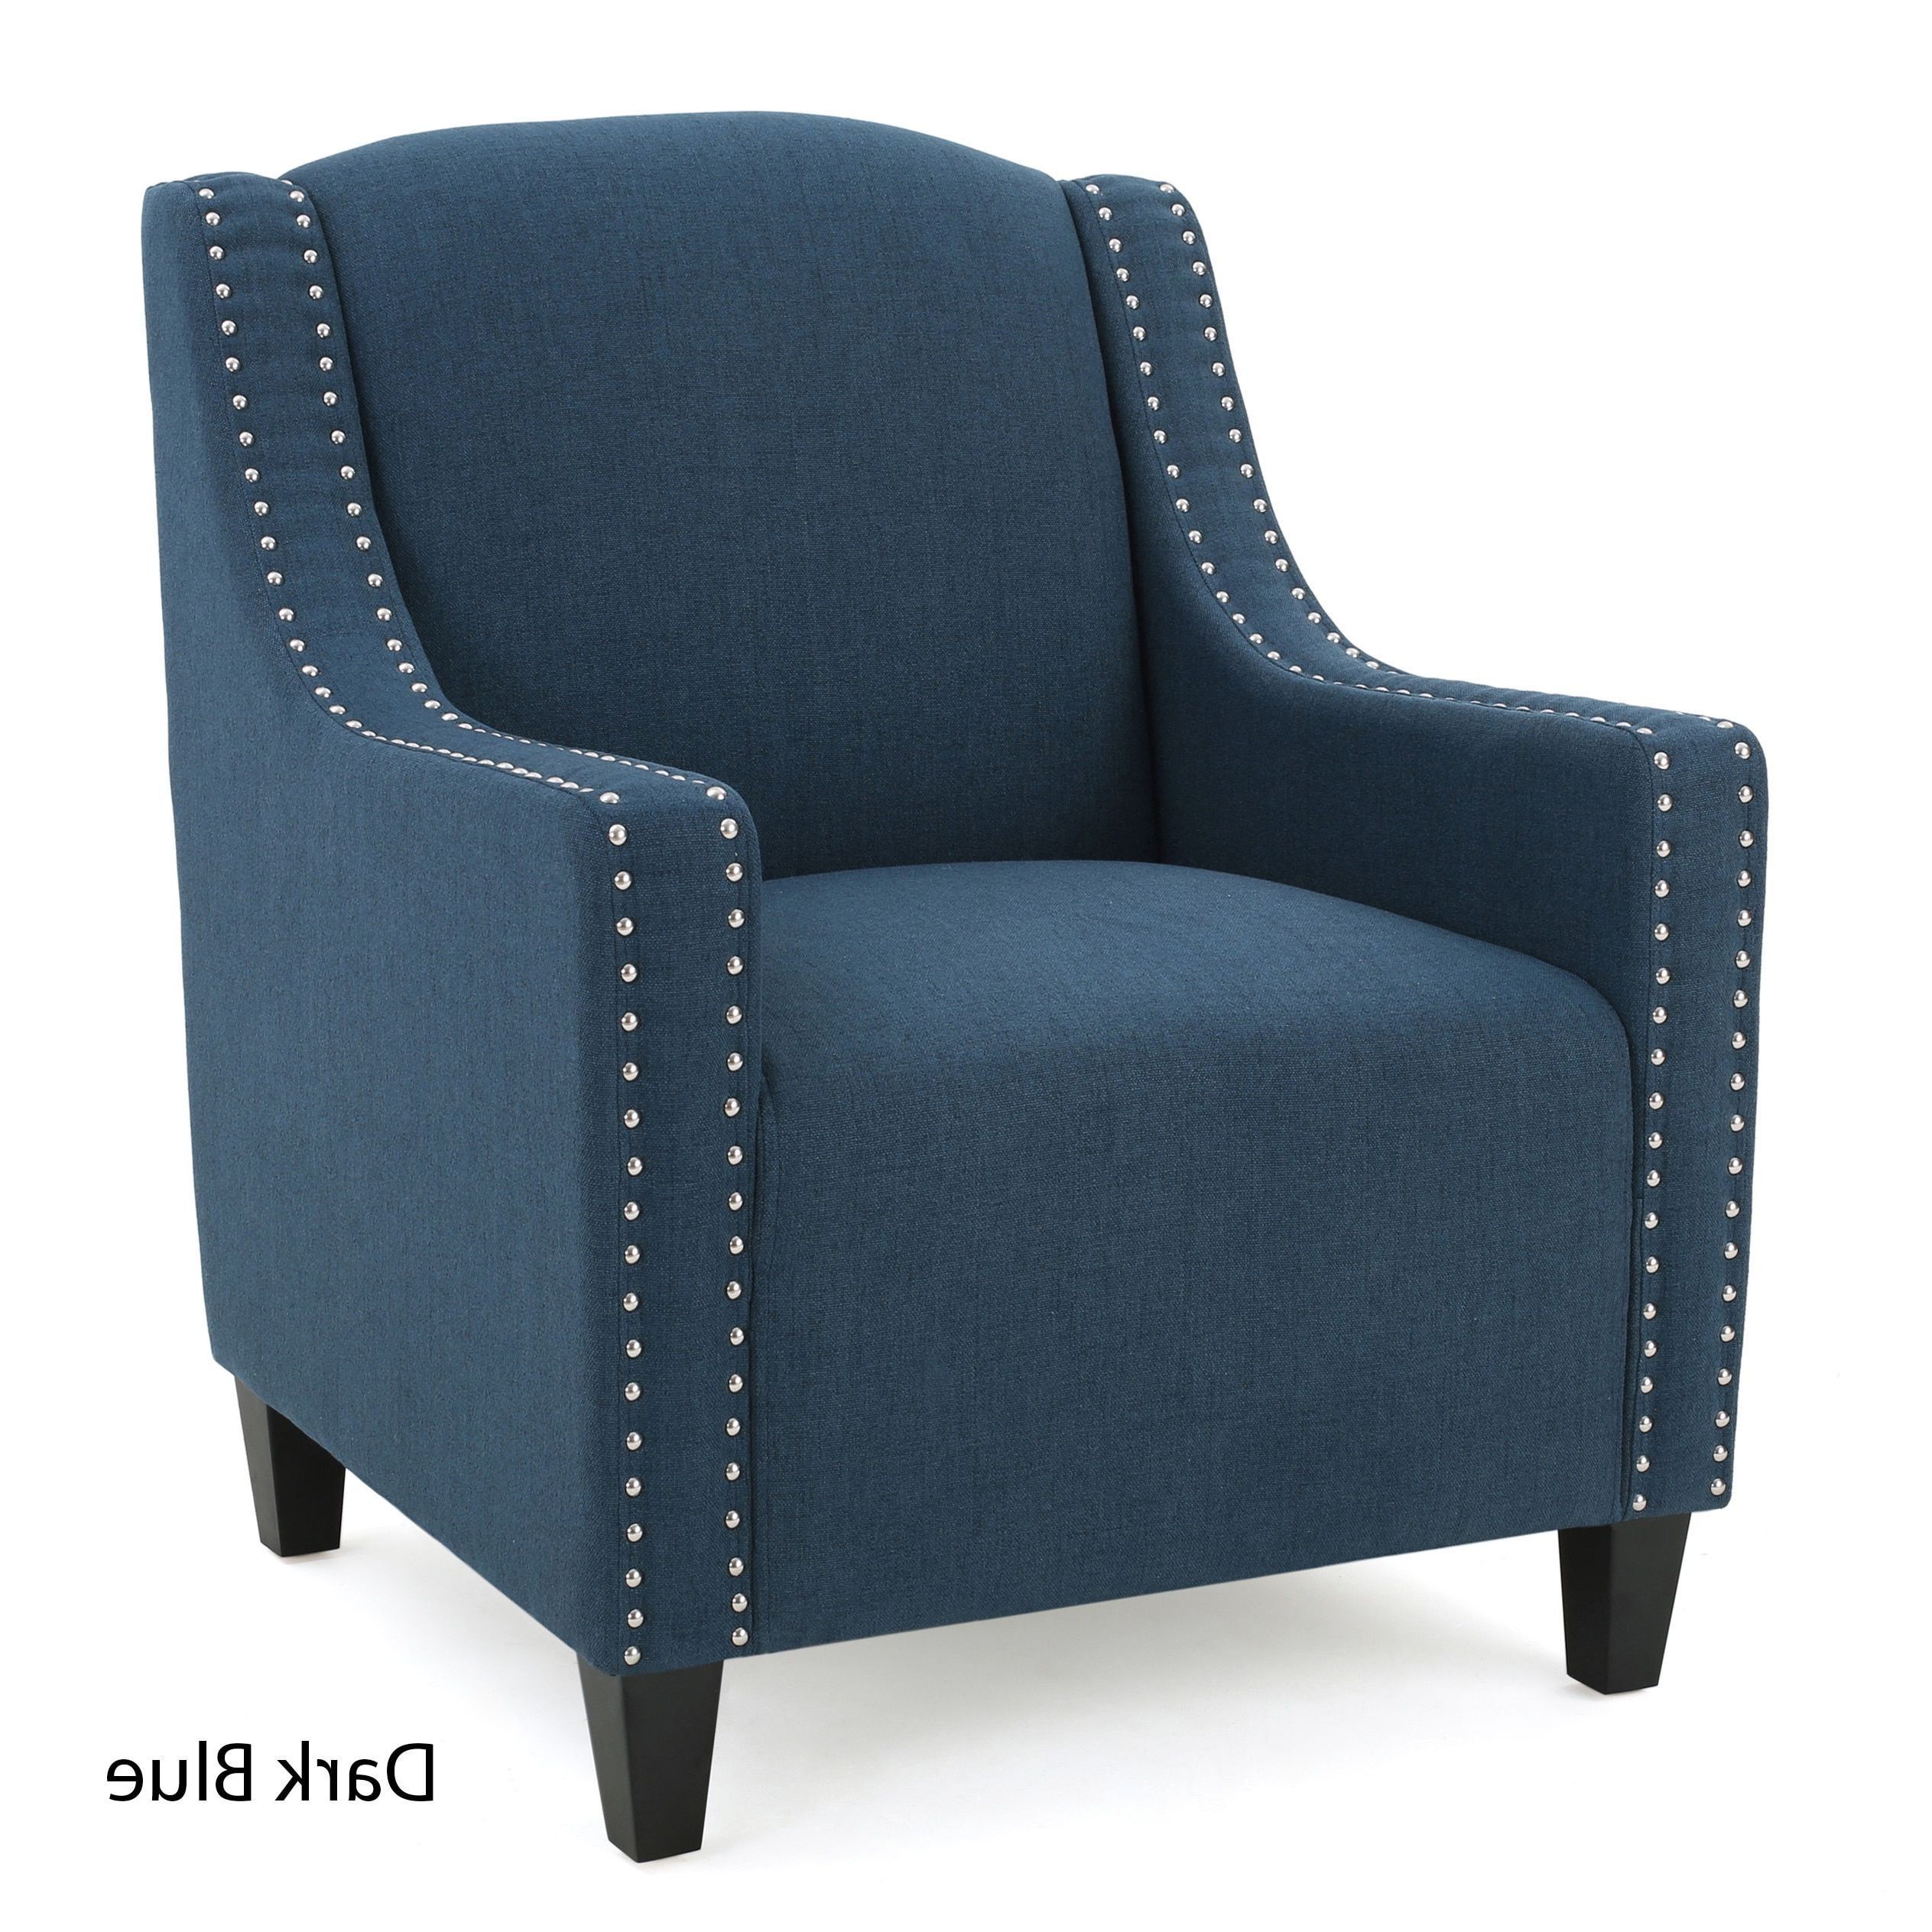 2020 Borst Armchairs In Overstock: Online Shopping – Bedding, Furniture (View 4 of 20)